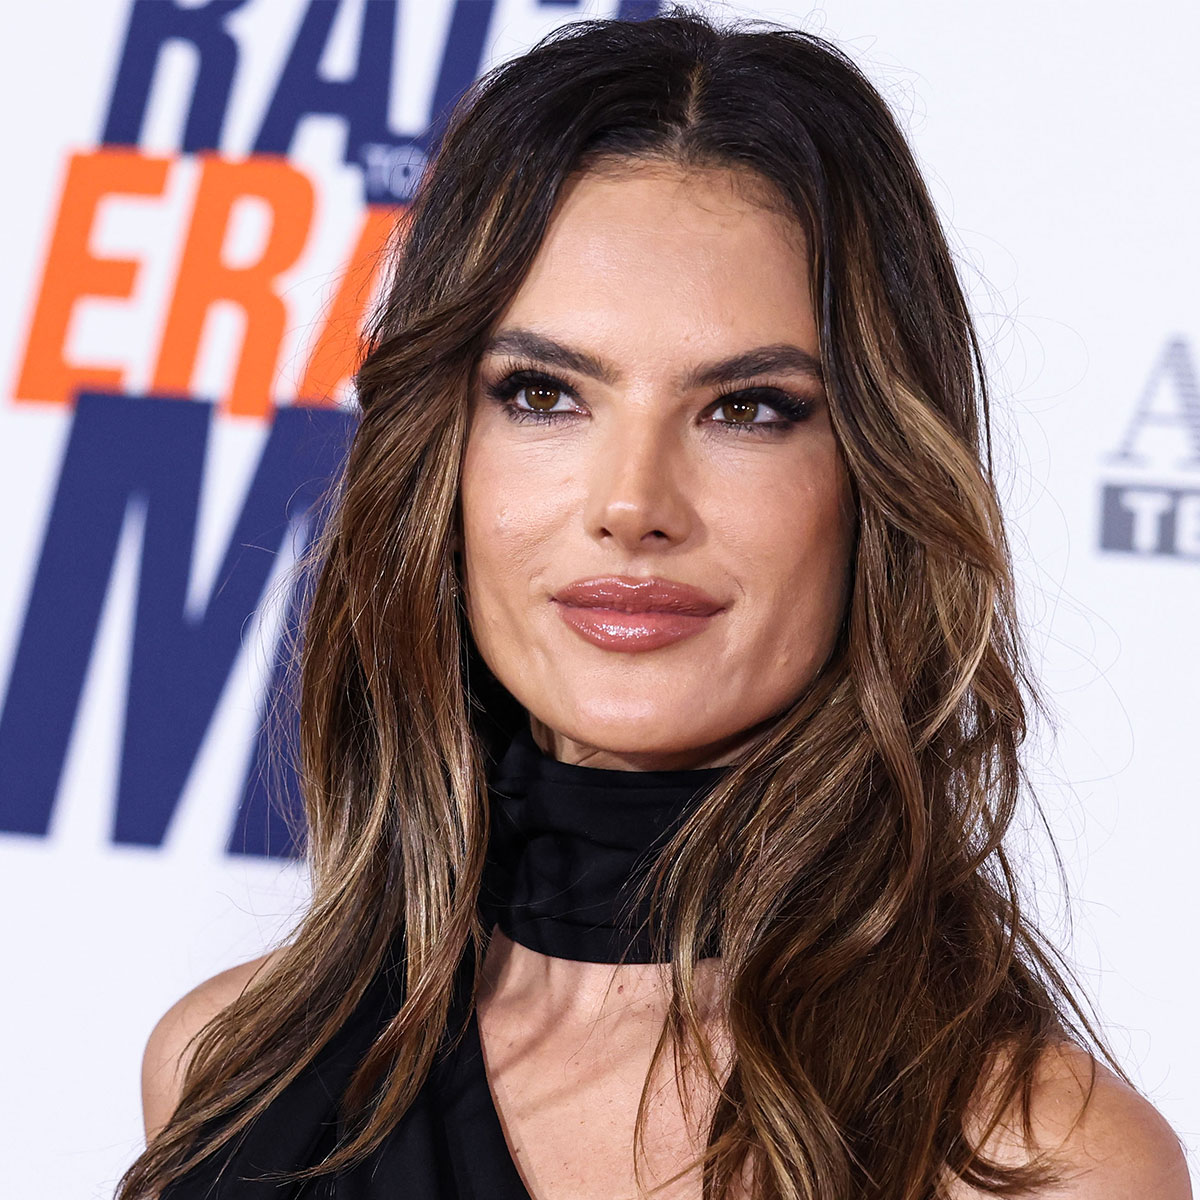 Model alessandra ambrosio turns 41: her most